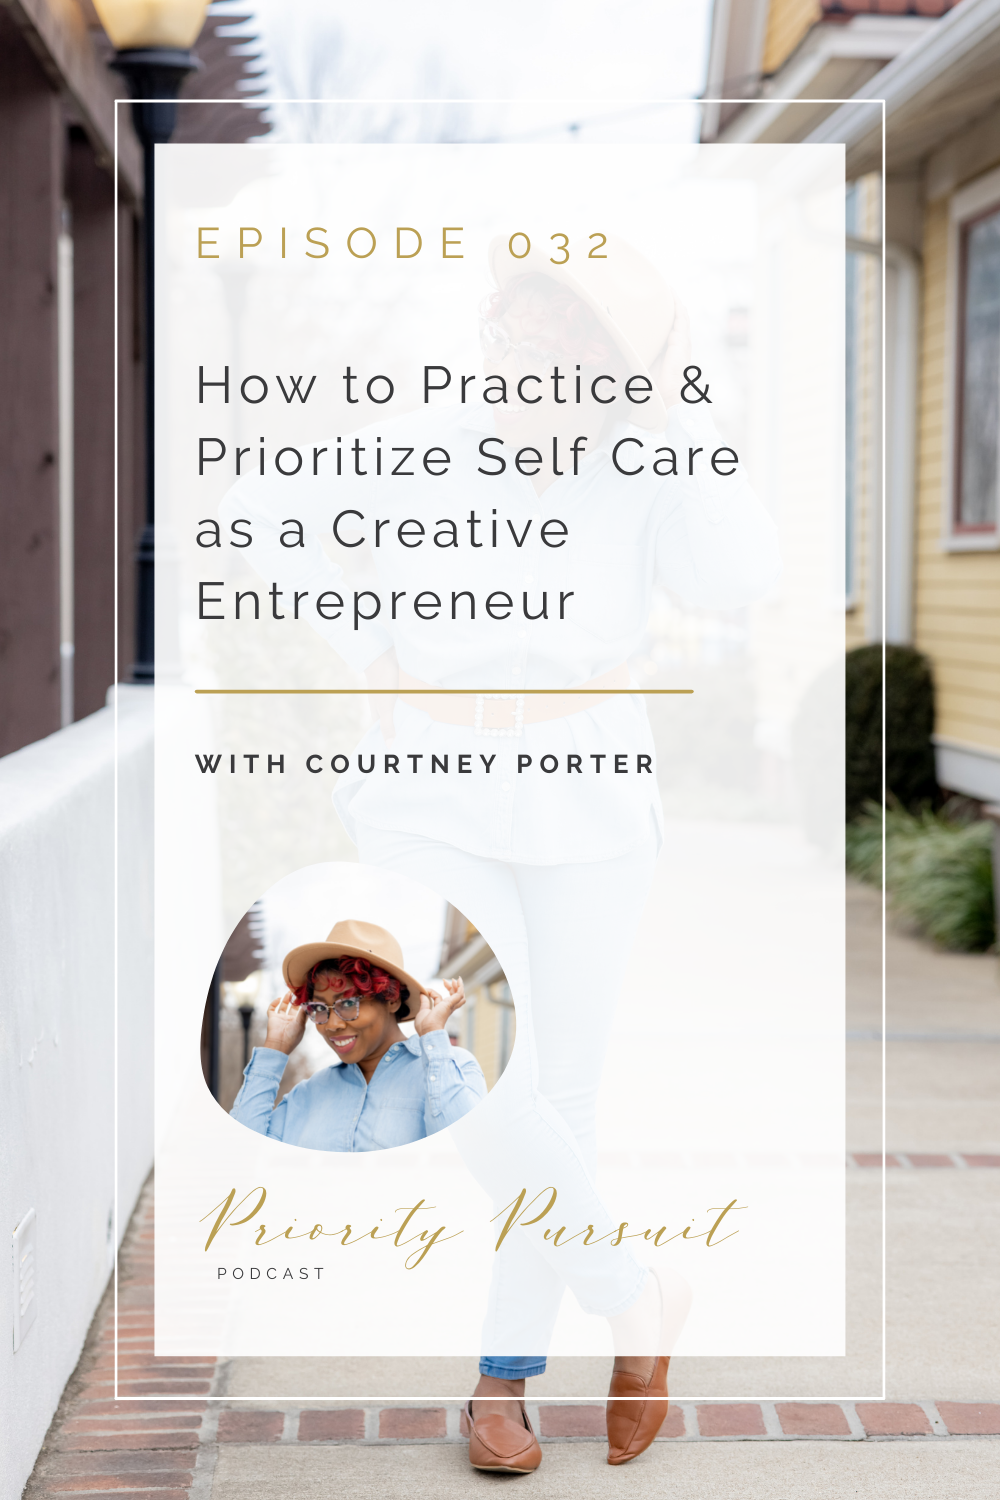 Victoria Rayburn and Courtney Porter discuss how to practice and prioritize self care as a creative entrepreneur